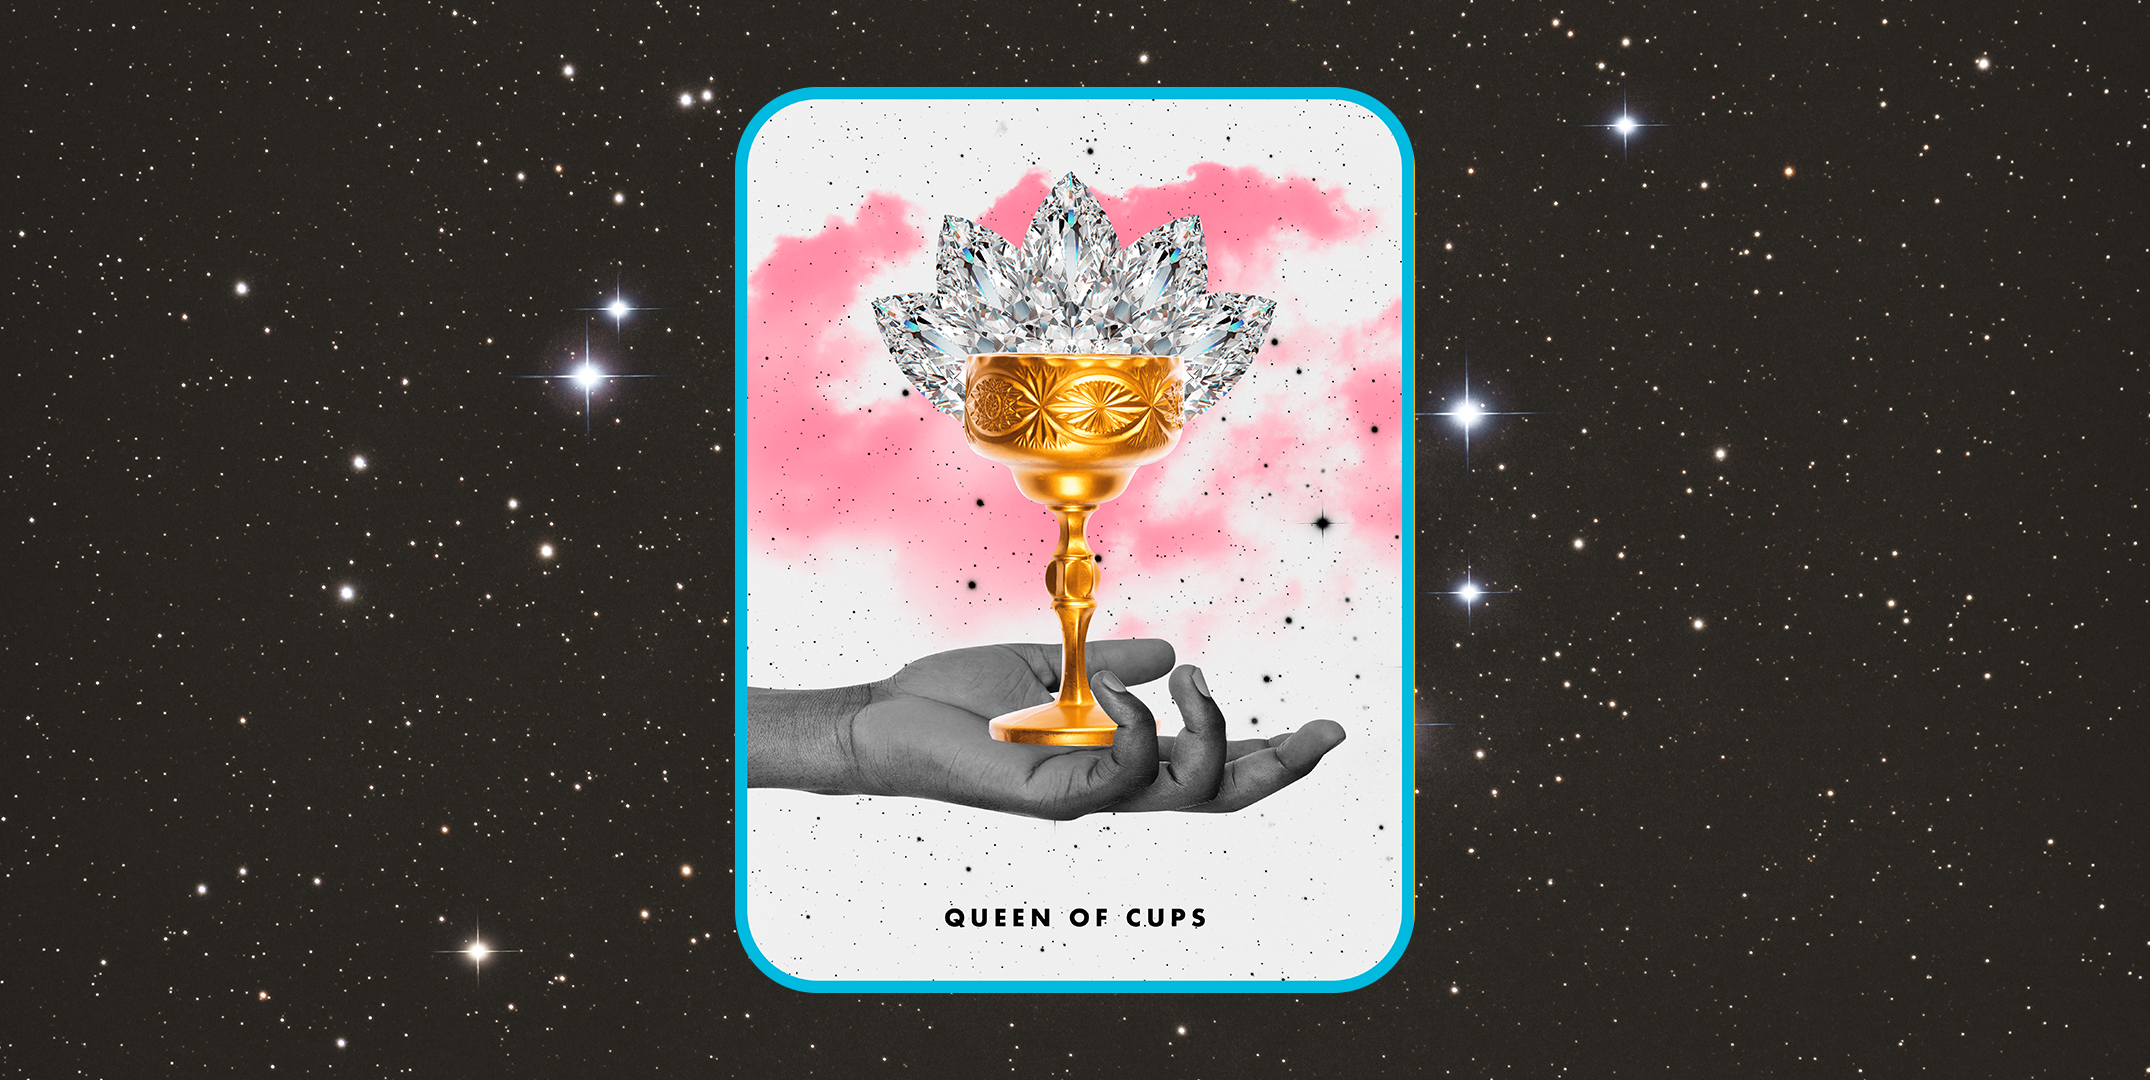 Queen of Cups Tarot Card Meanings